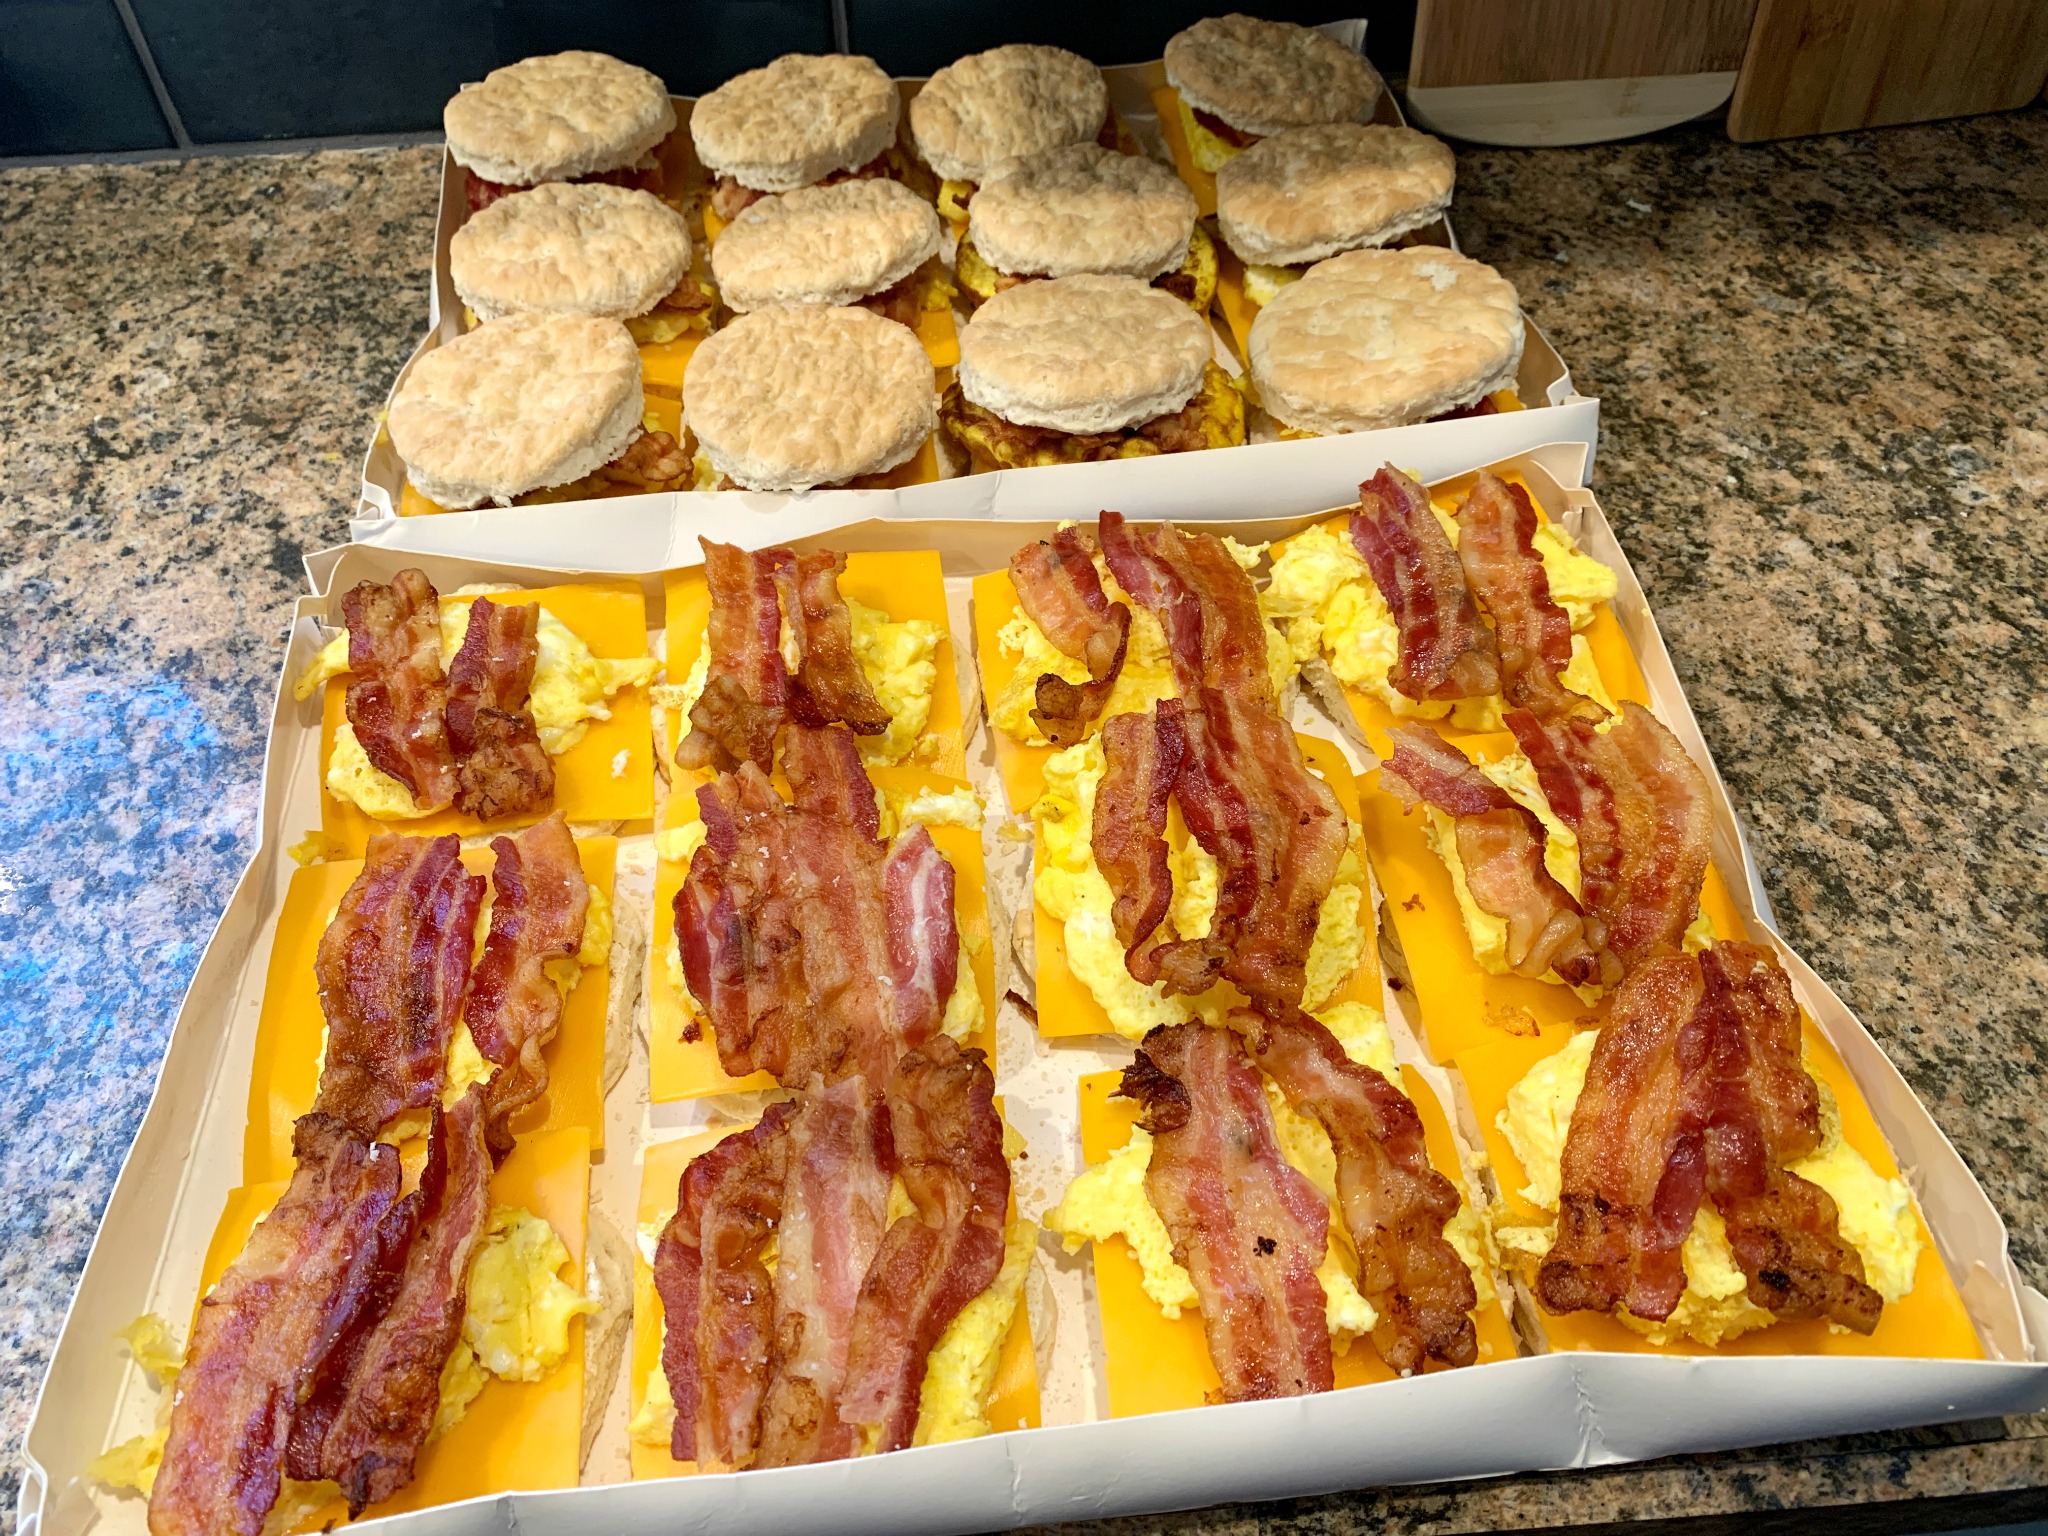 a dozen bacon, egg and cheese sandwiches without the top with another dozen sandwiches in the background with the top biscuit on